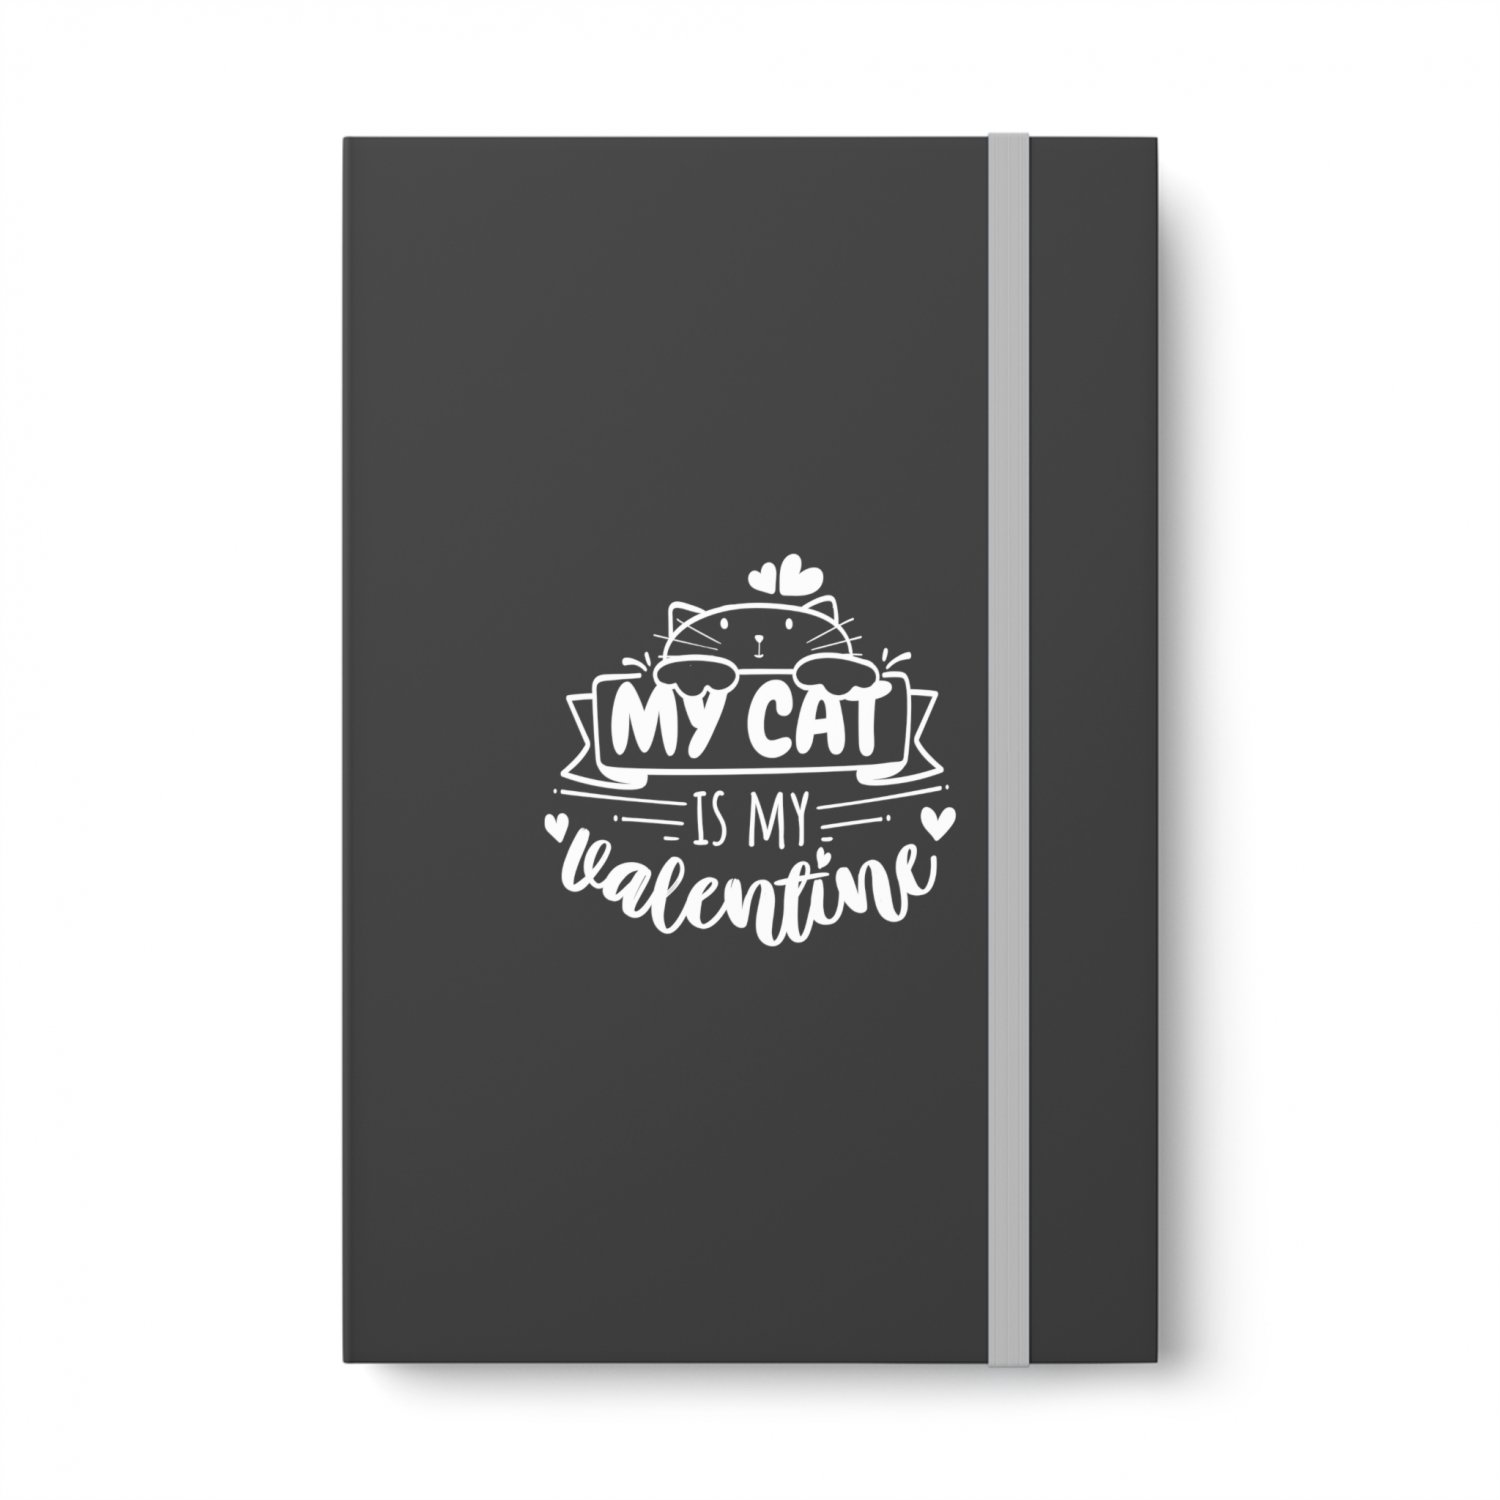 My Cat is My Valentine, Color Contrast Notebook - Ruled - Gray